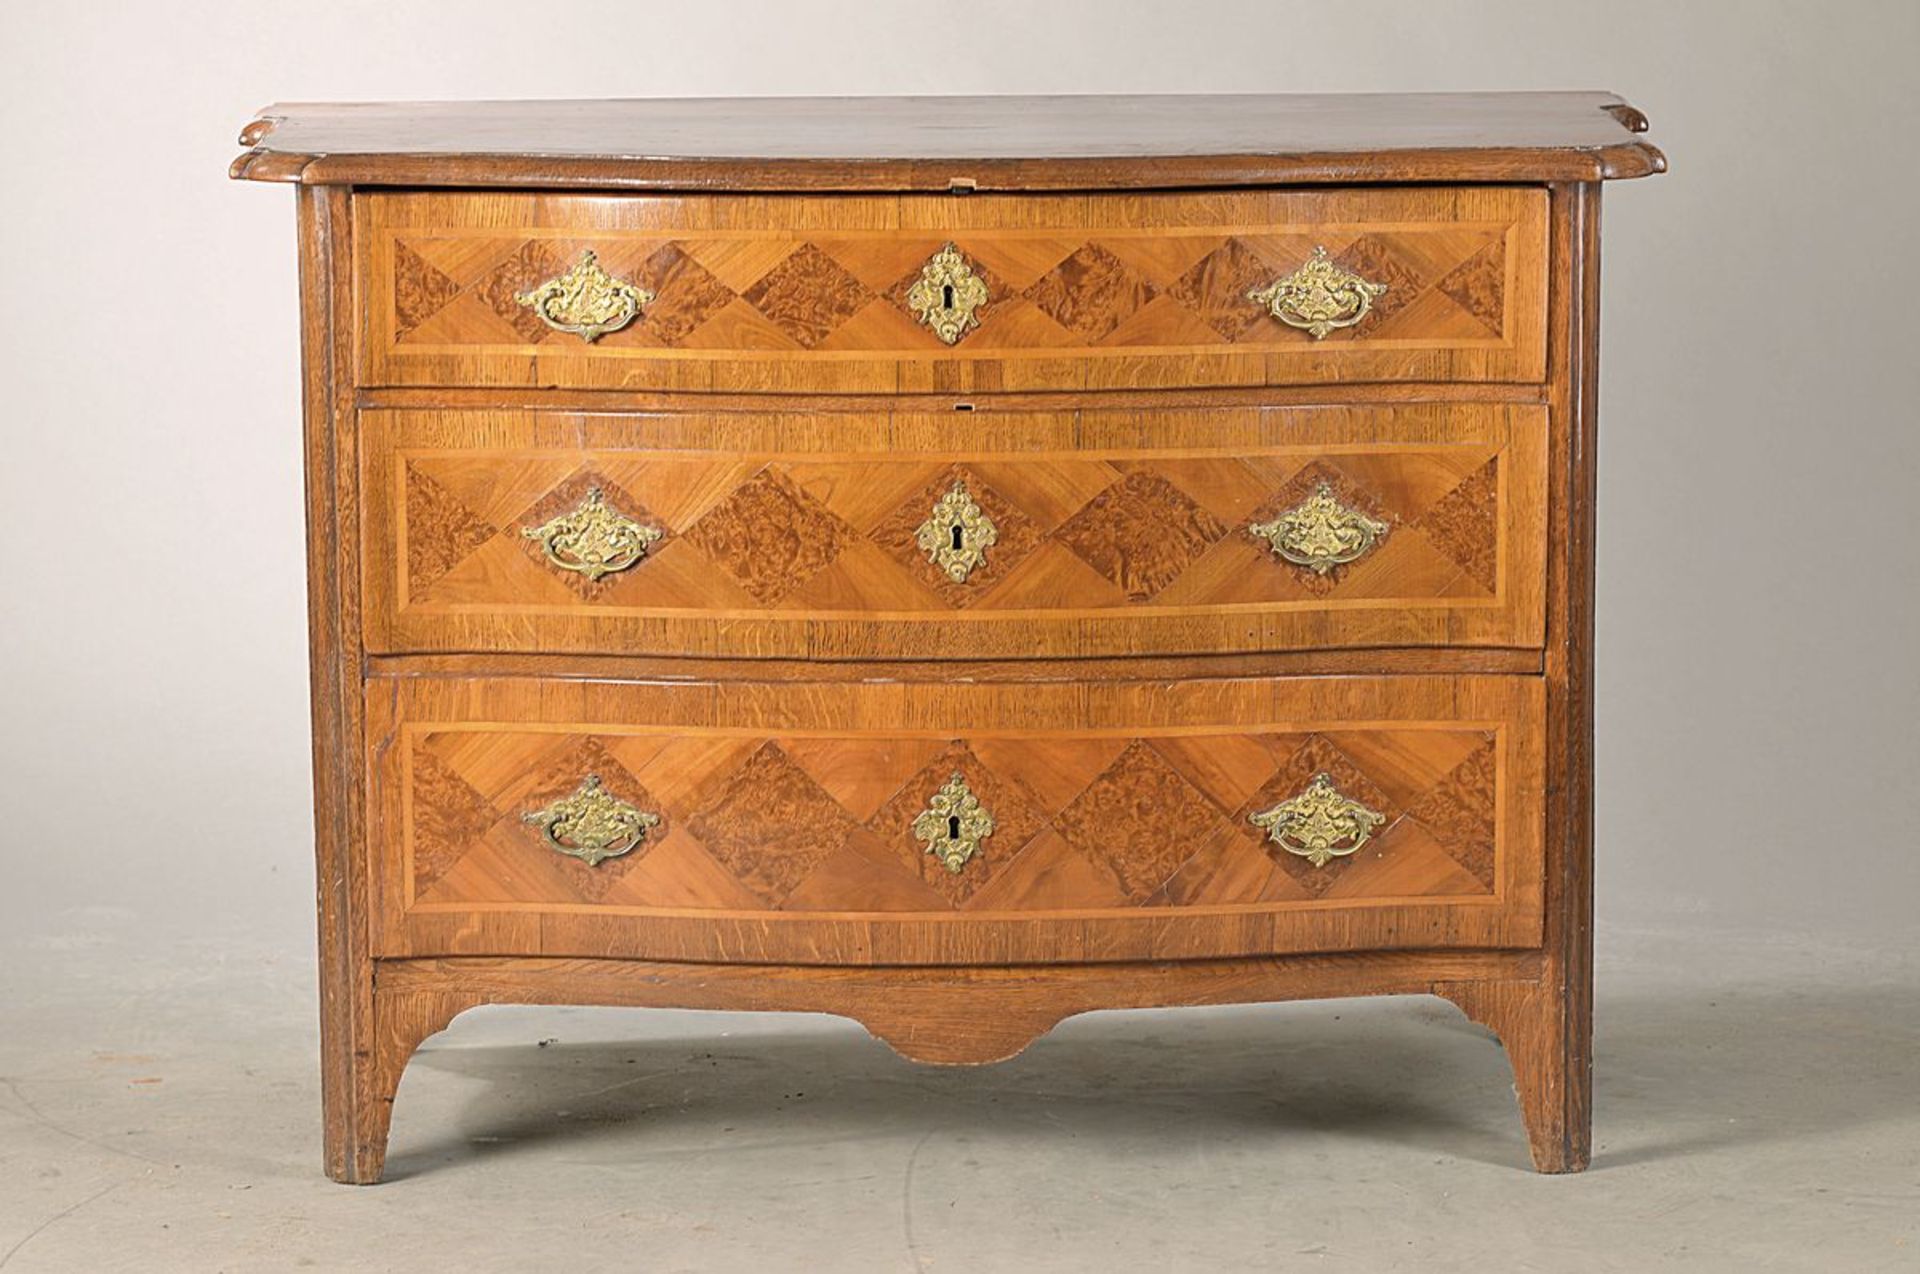 cambered chest of drawers, Sweden, around 1760/70, Walnut and walnut veneer, rhomb- and ribbon